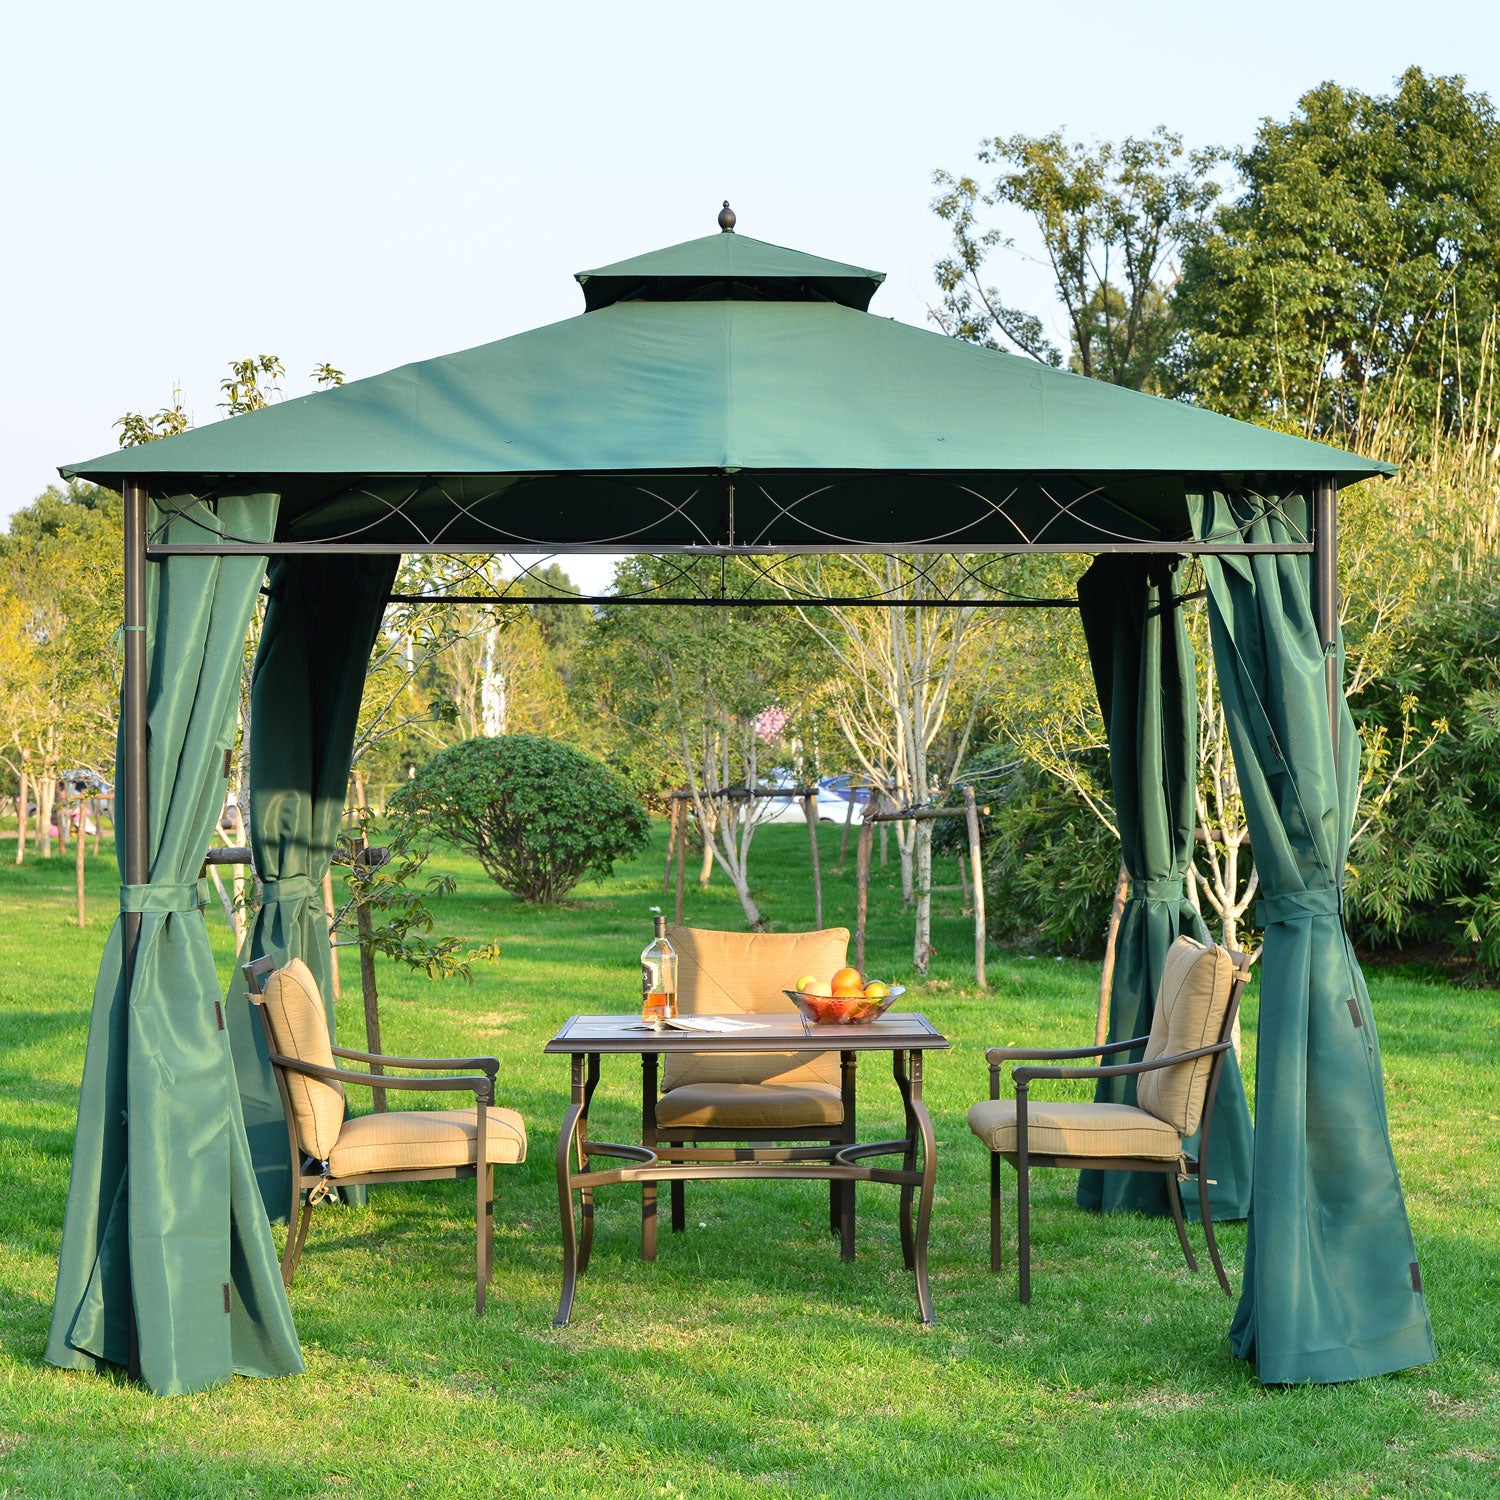 Outsunny 3(m) x 3(m) Metal Garden Gazebo Marquee Party Tent Patio Canopy Pavilion + Sidewalls - Green